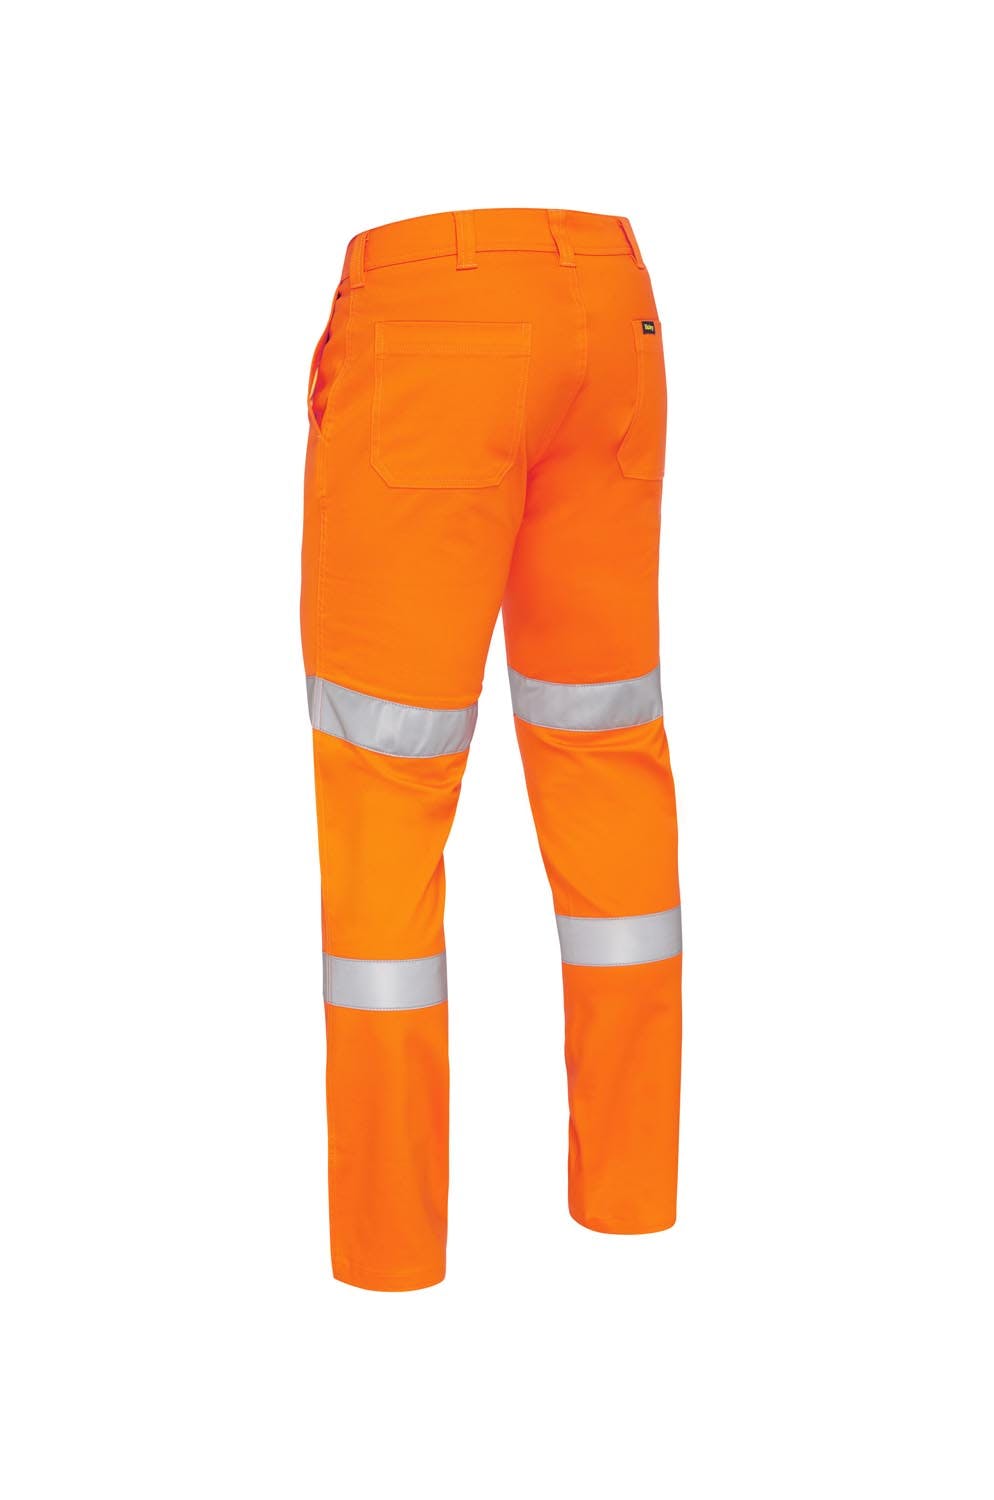 Bisley Taped Biomotion Stretch Cotton Drill Work Pants_1